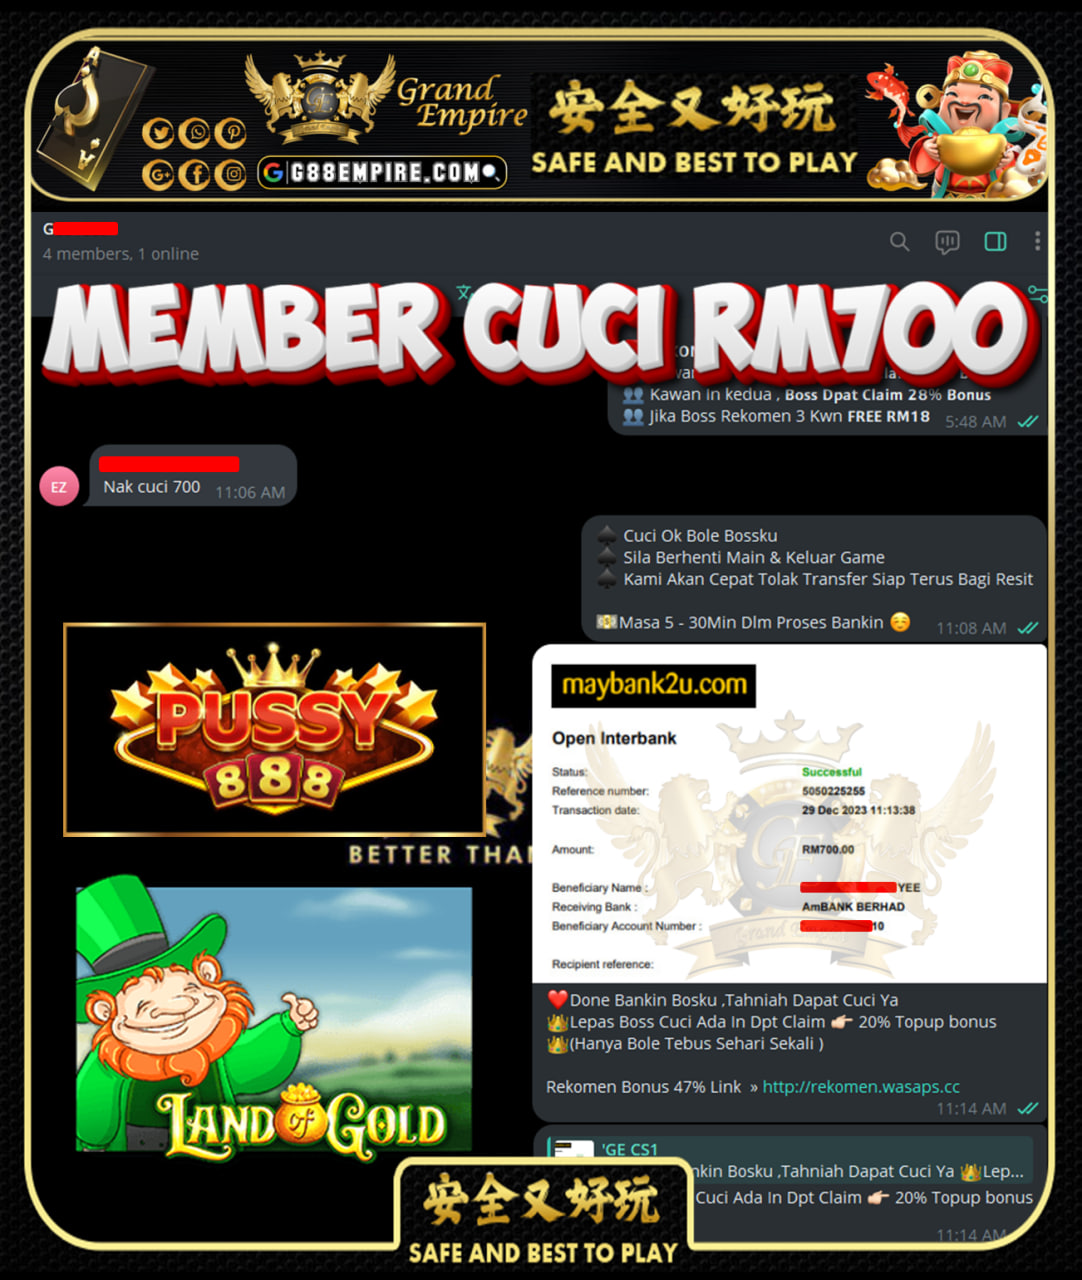 PUSSY888 LAND OF GOLD CUCI RM700!!!